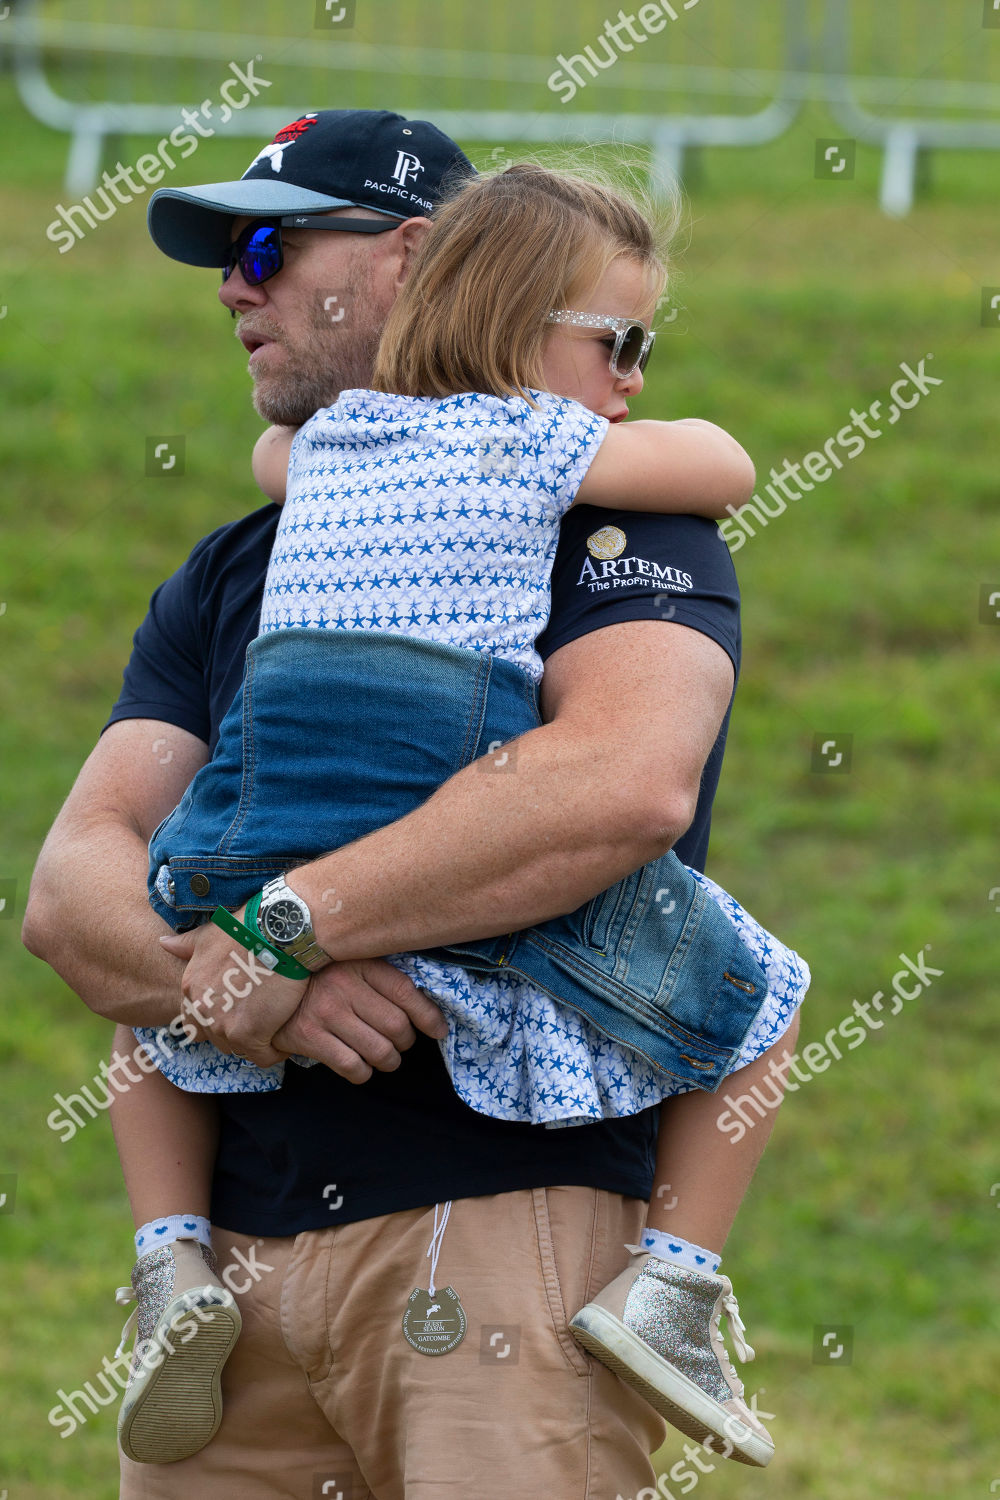 festival-of-british-eventing-day2-gatcombe-gloucestershire-uk-shutterstock-editorial-10353523y.jpg